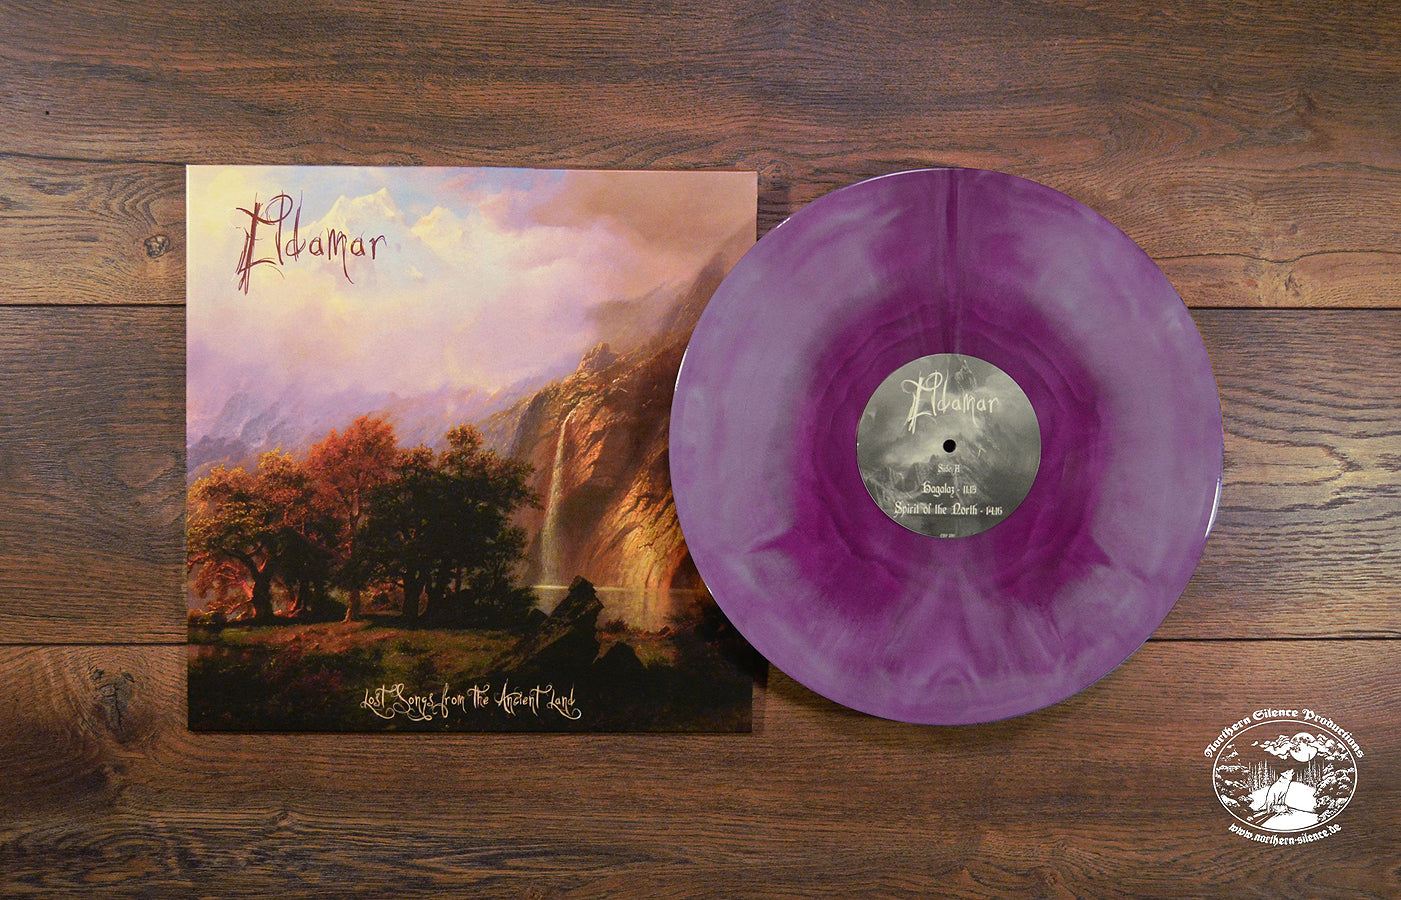 ELDAMAR "Lost Songs from the Ancient Land" Vinyl LP (2 color options)